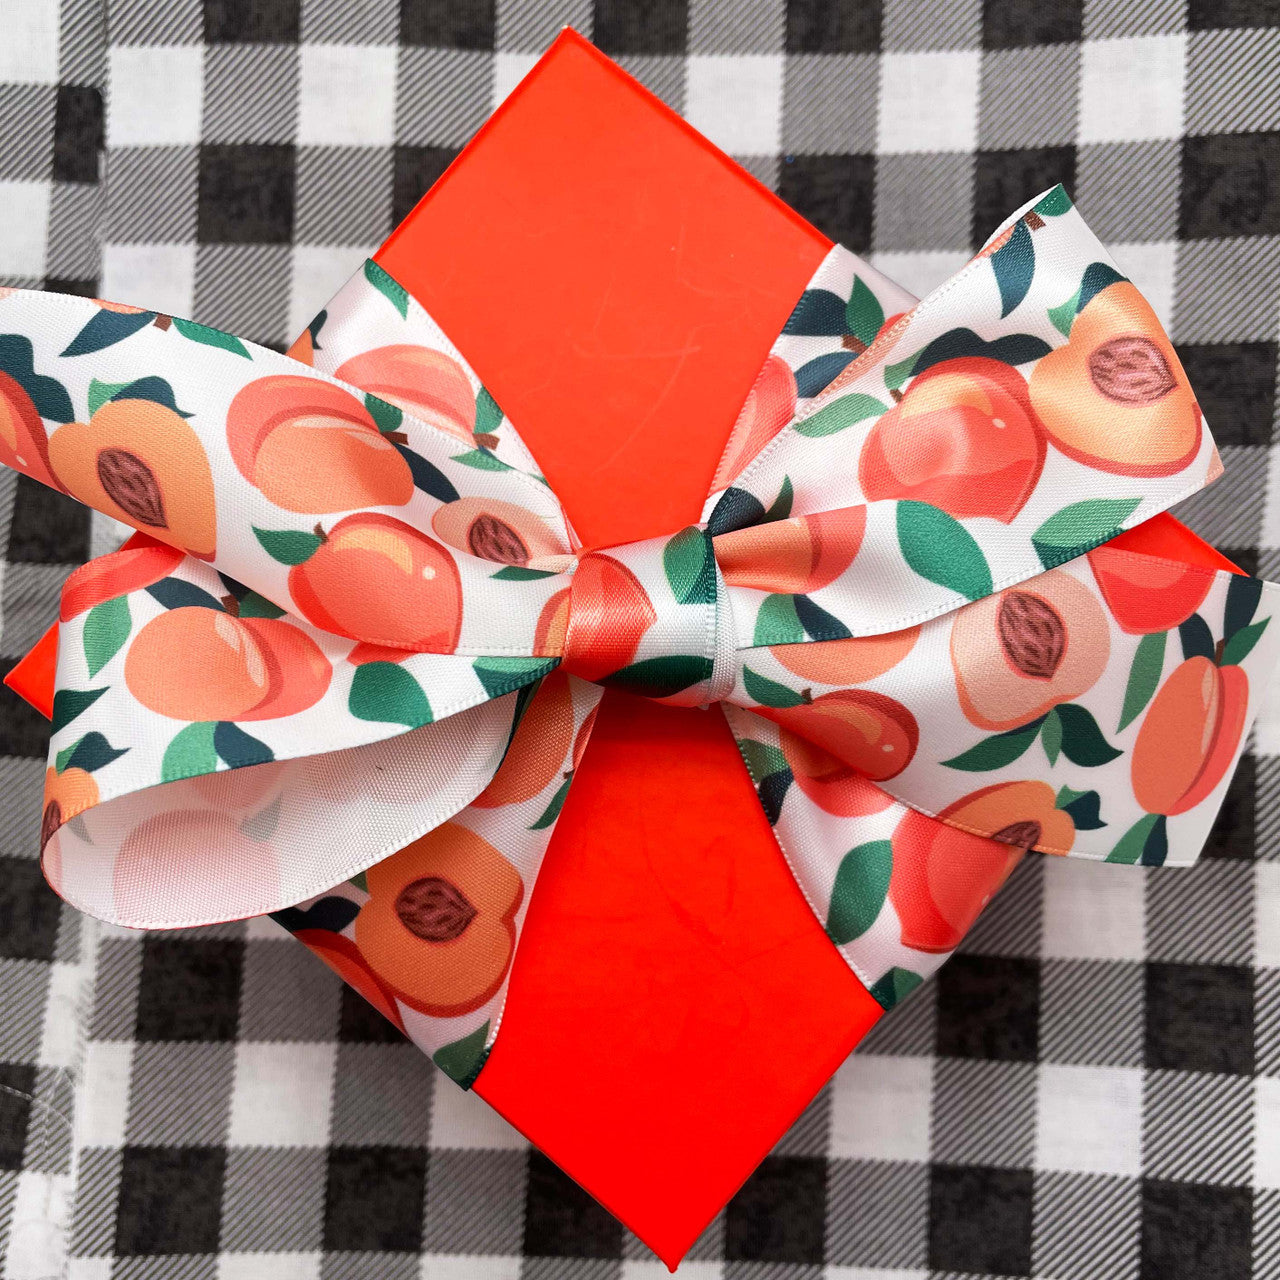 Tie a sweet bow on a little Summer gift for a peachy Summer gift!